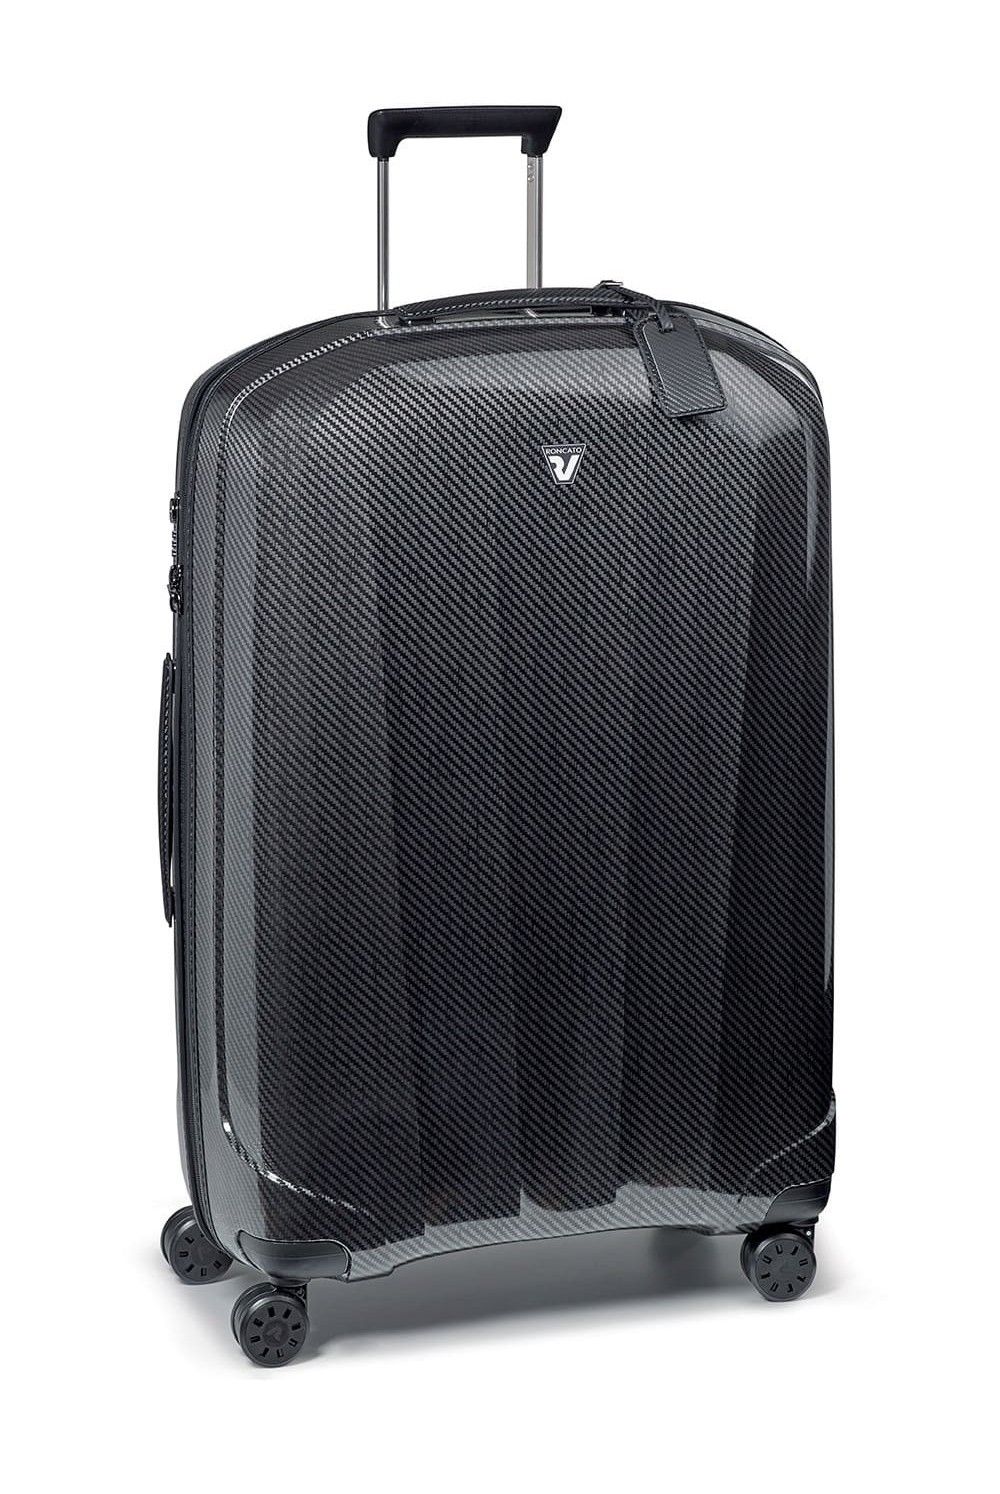 Roncato We Are Glam 78 cm 120 litres Grand 4 roues